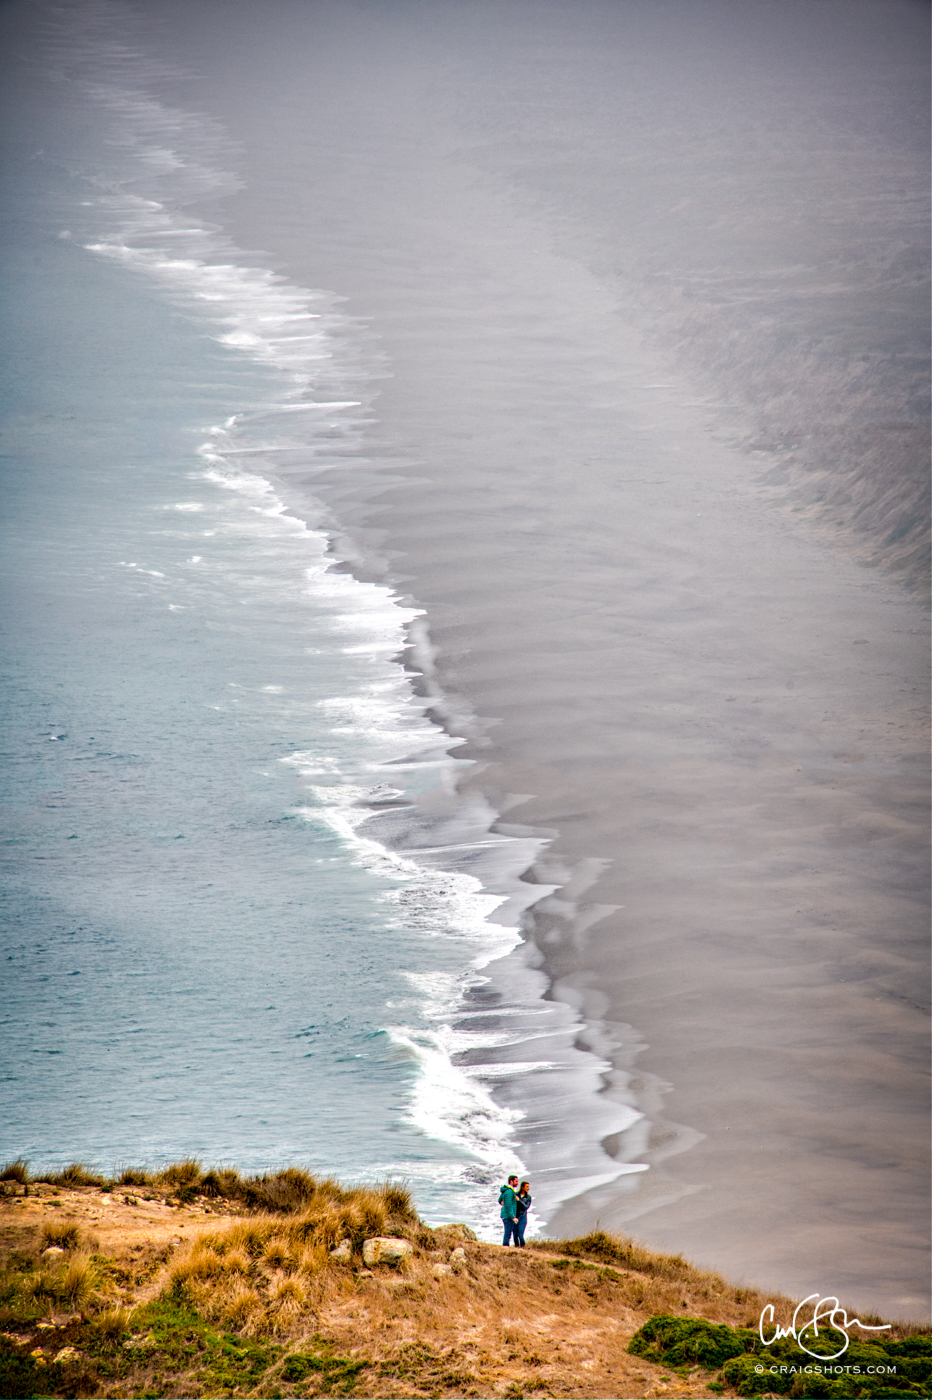 Nov 8: View From South Beach Overlook, Point Reyes National Seashore